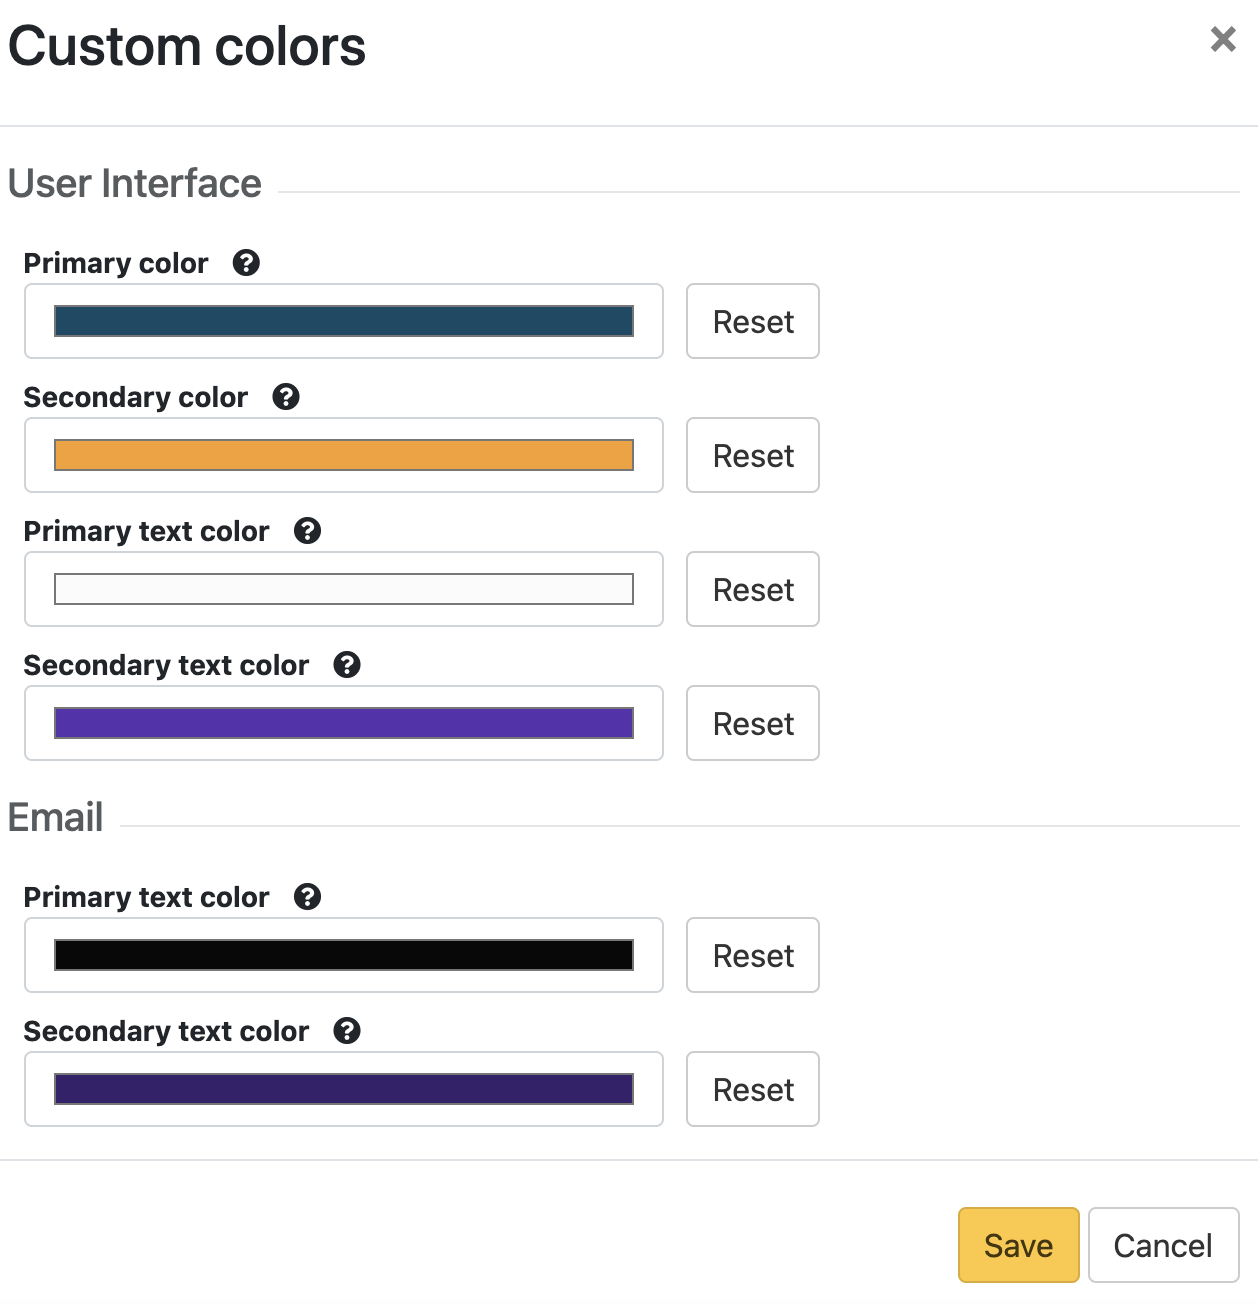 Mapping the custom colors chosen to the login page